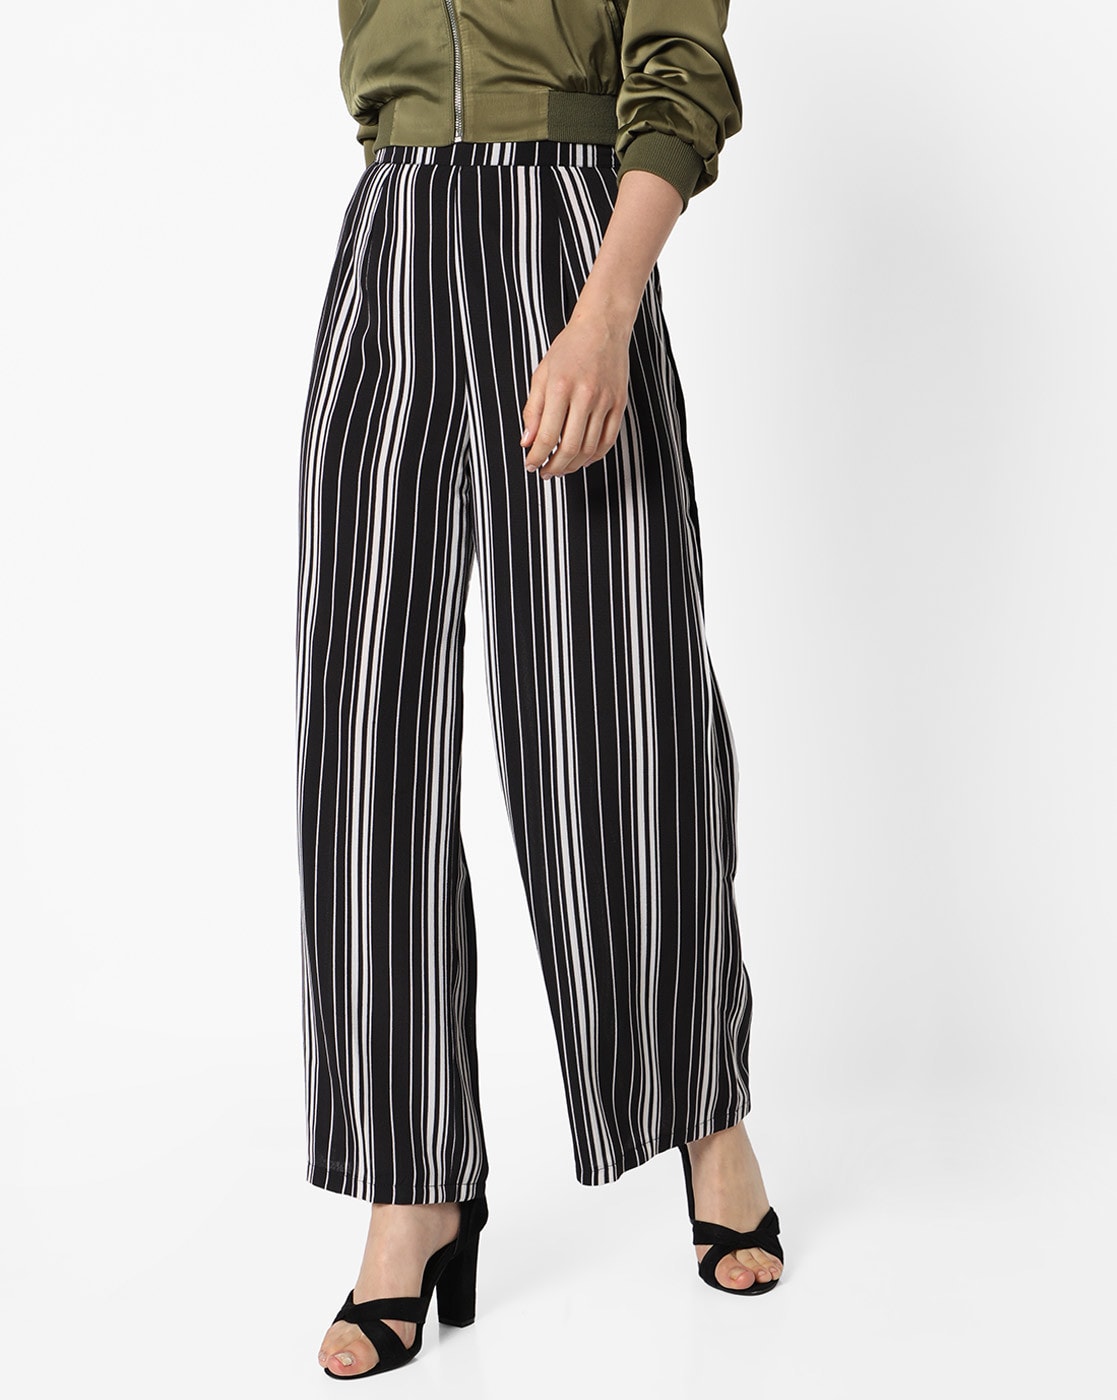 Forever 21 Stripe Palazzo Pants  Stripped pants outfit Striped palazzo  pants Skirt and sneakers